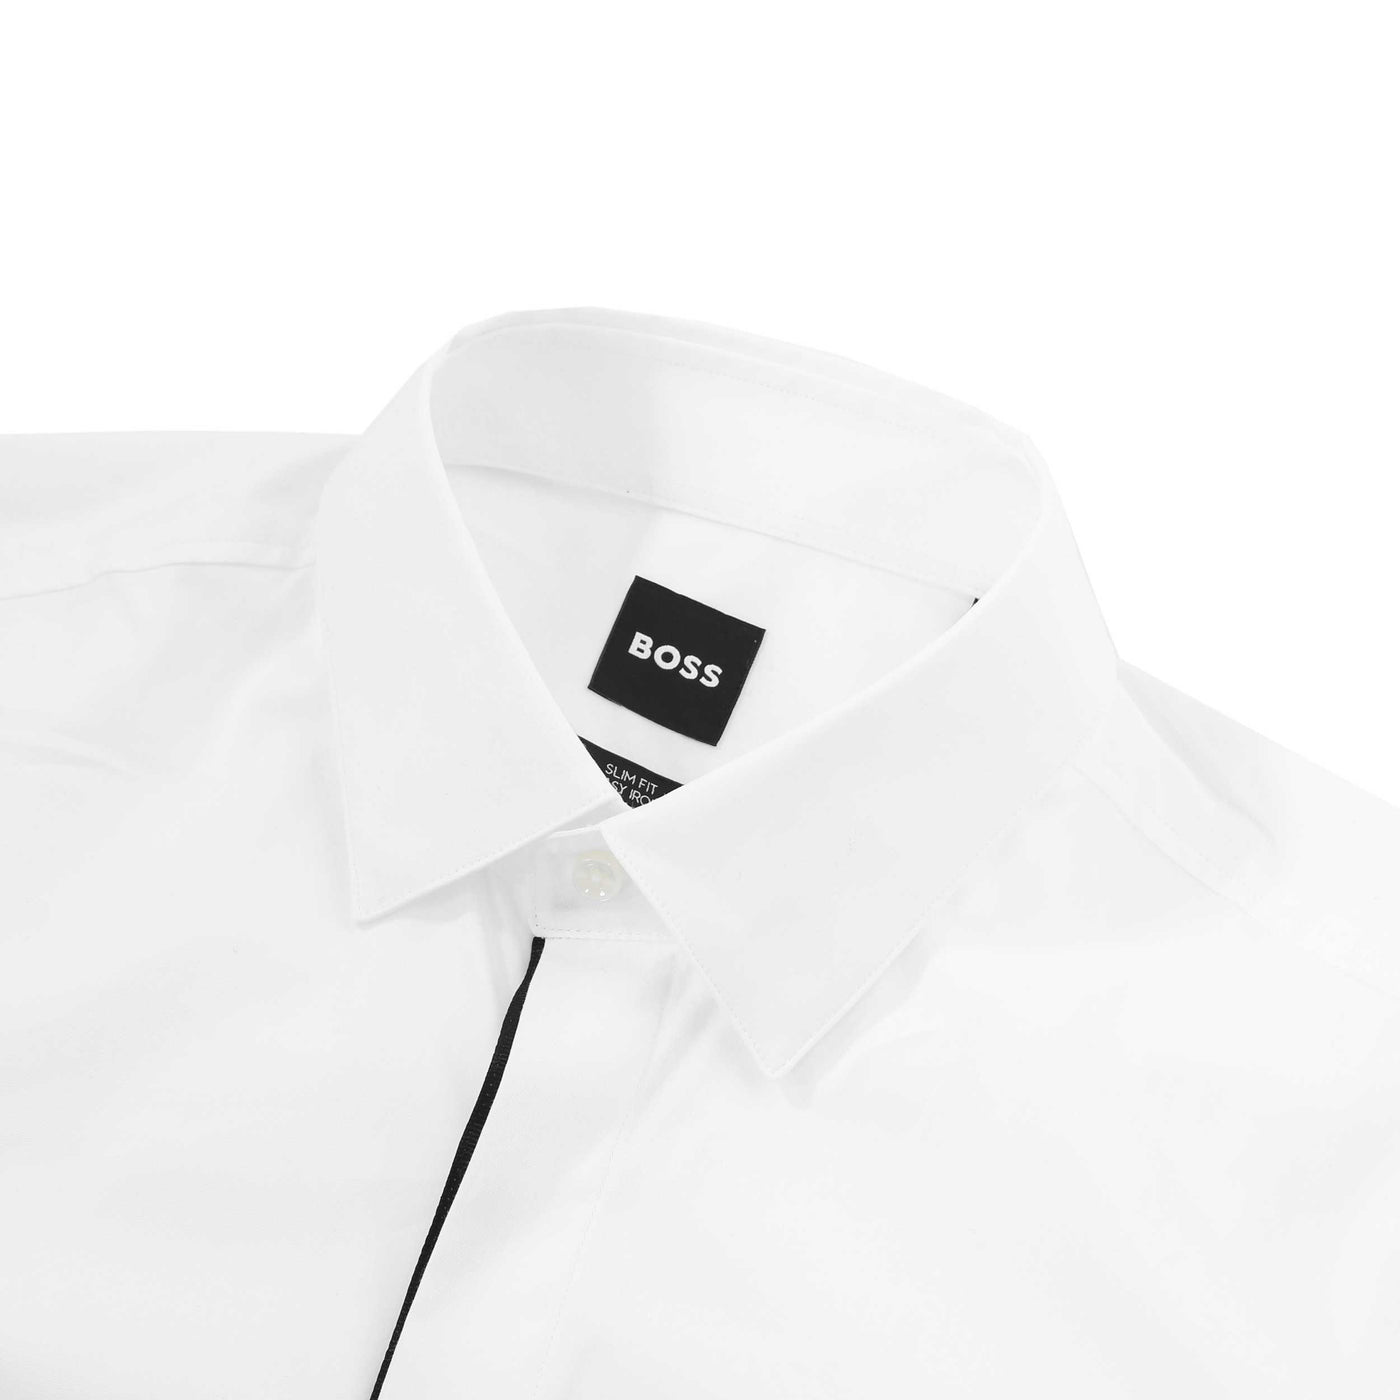 BOSS H Hank Party2 221 Shirt in White Collar